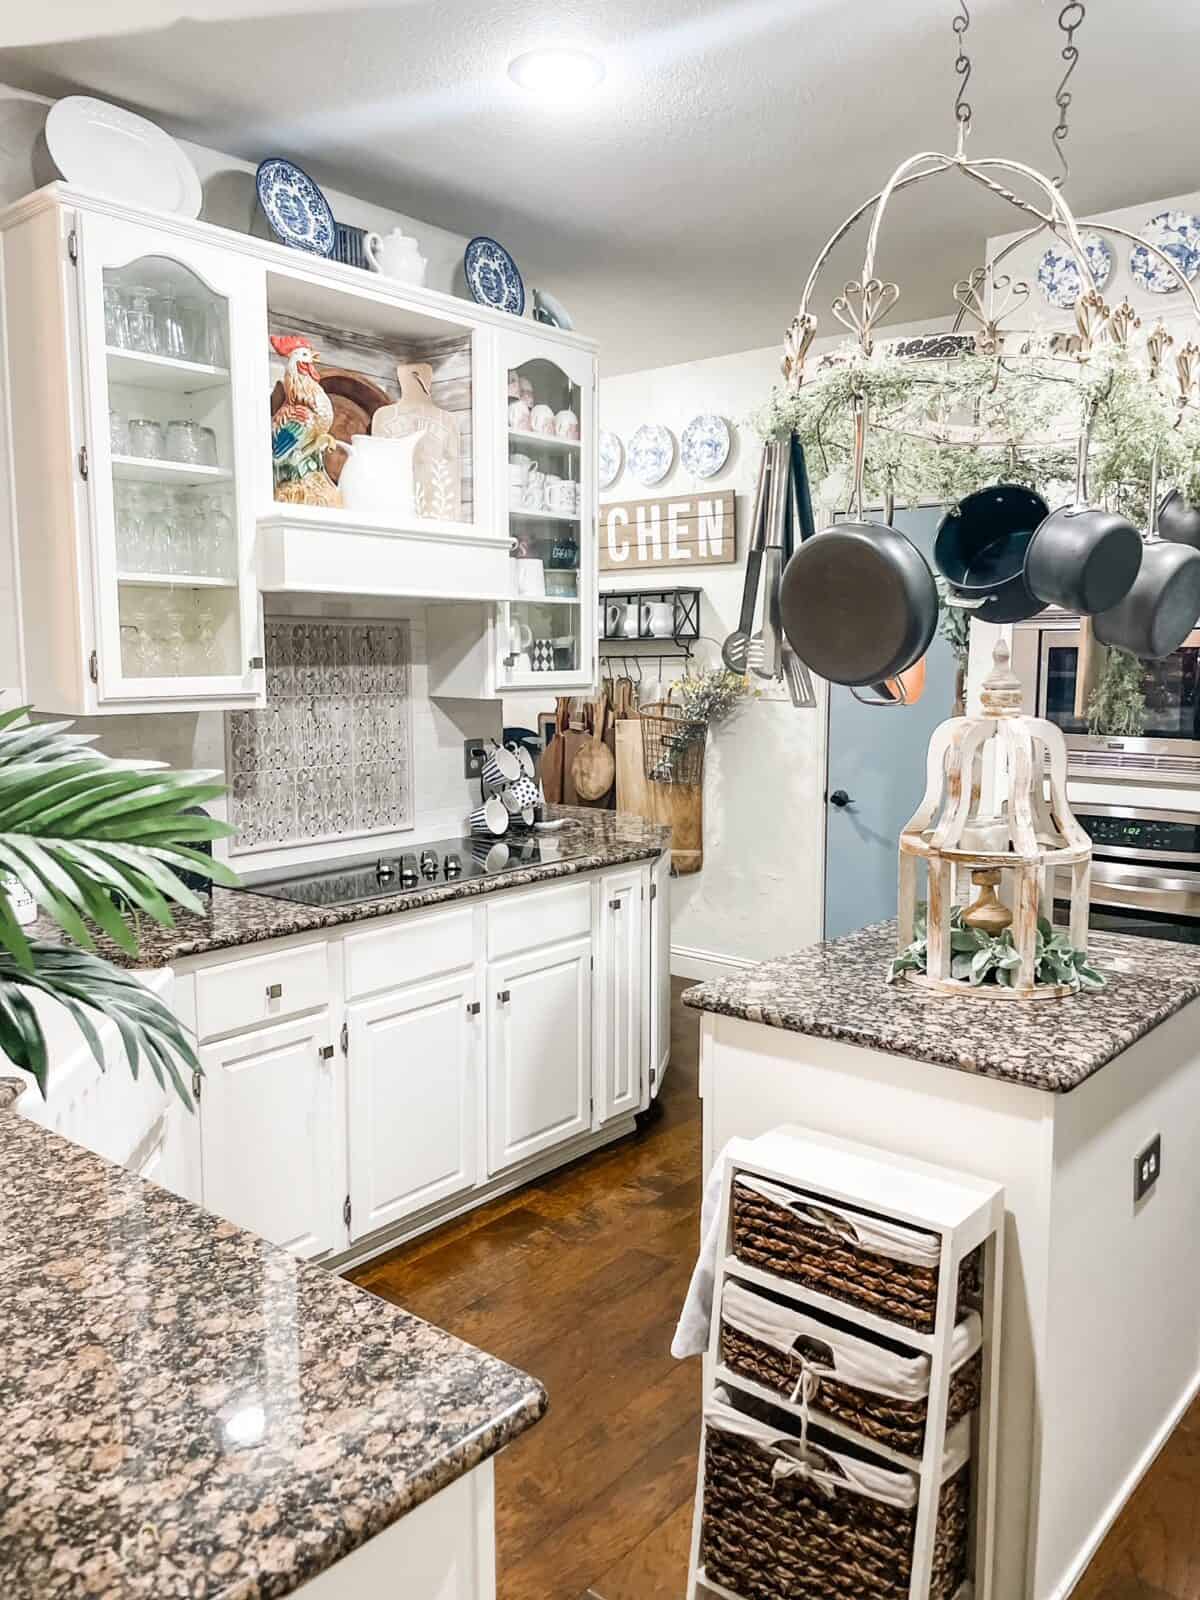 Kitchen Must-Haves in 2023 - Creeds Direct Blog Post